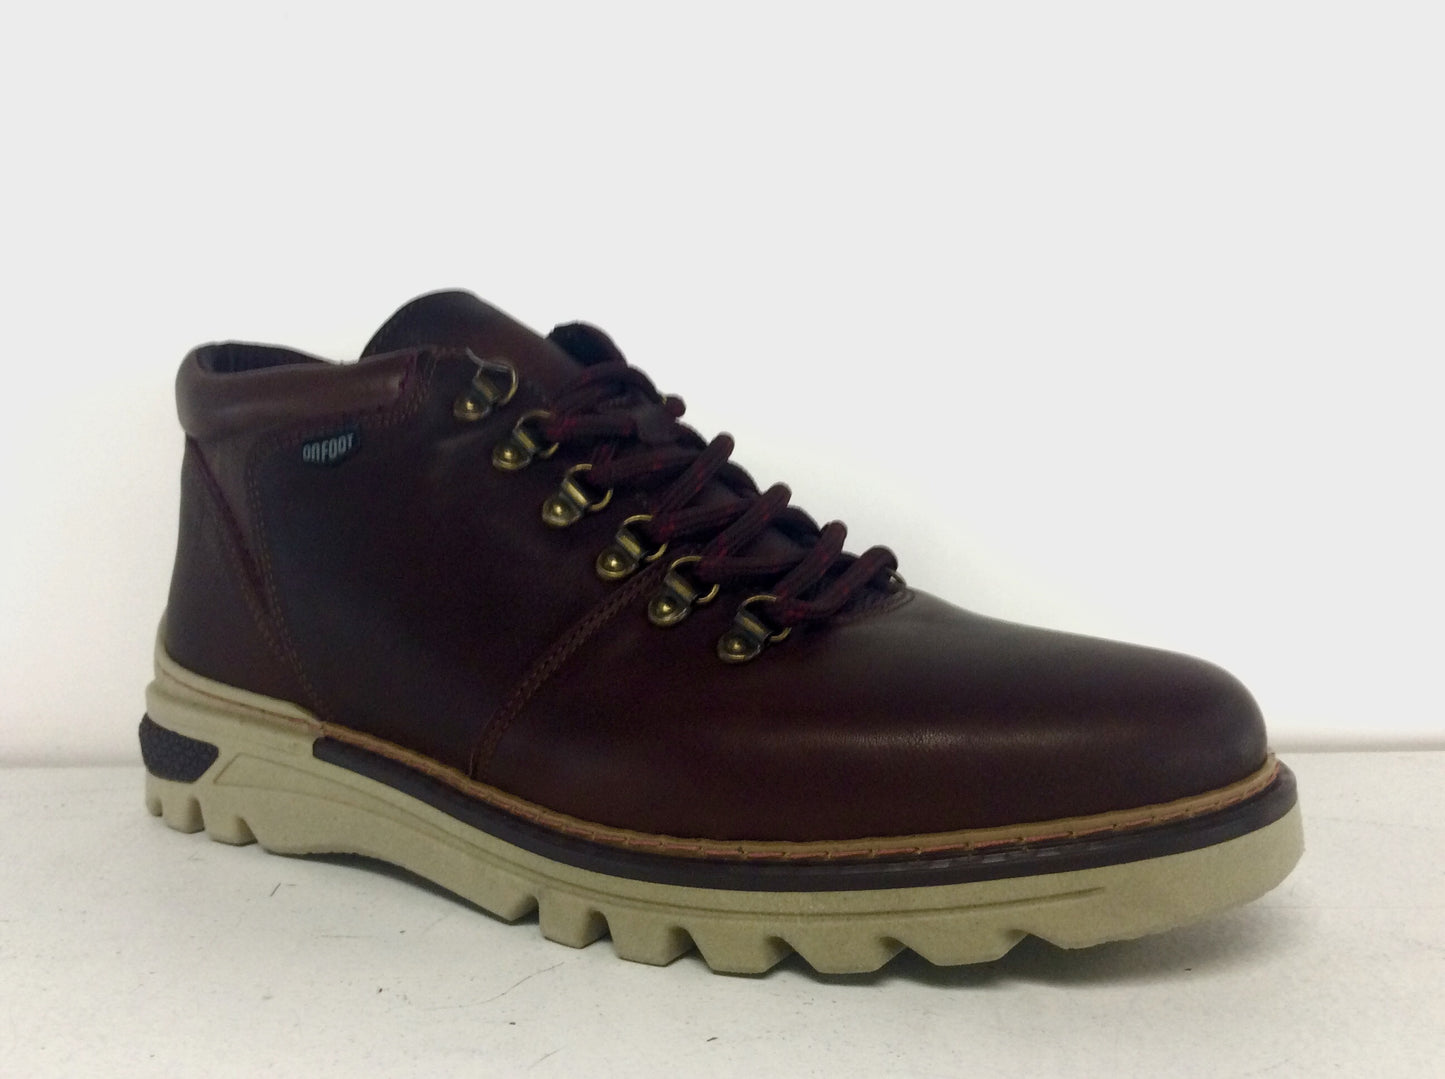 OFM 200-220 BROWN LEATHER